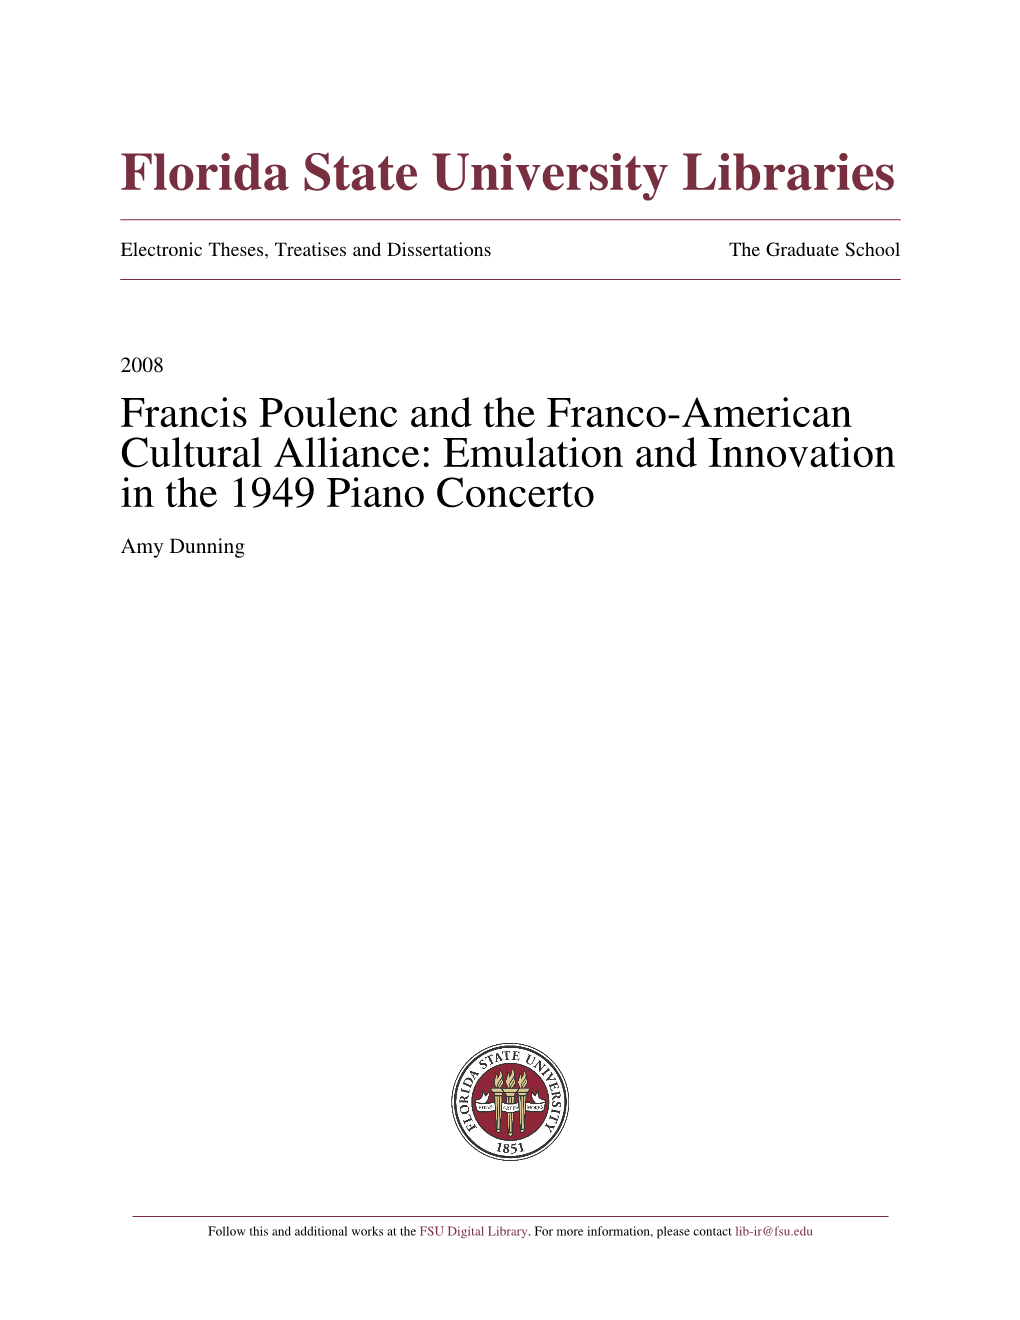 Francis Poulenc and the Franco-American Cultural Alliance: Emulation and Innovation in the 1949 Piano Concerto Amy Dunning